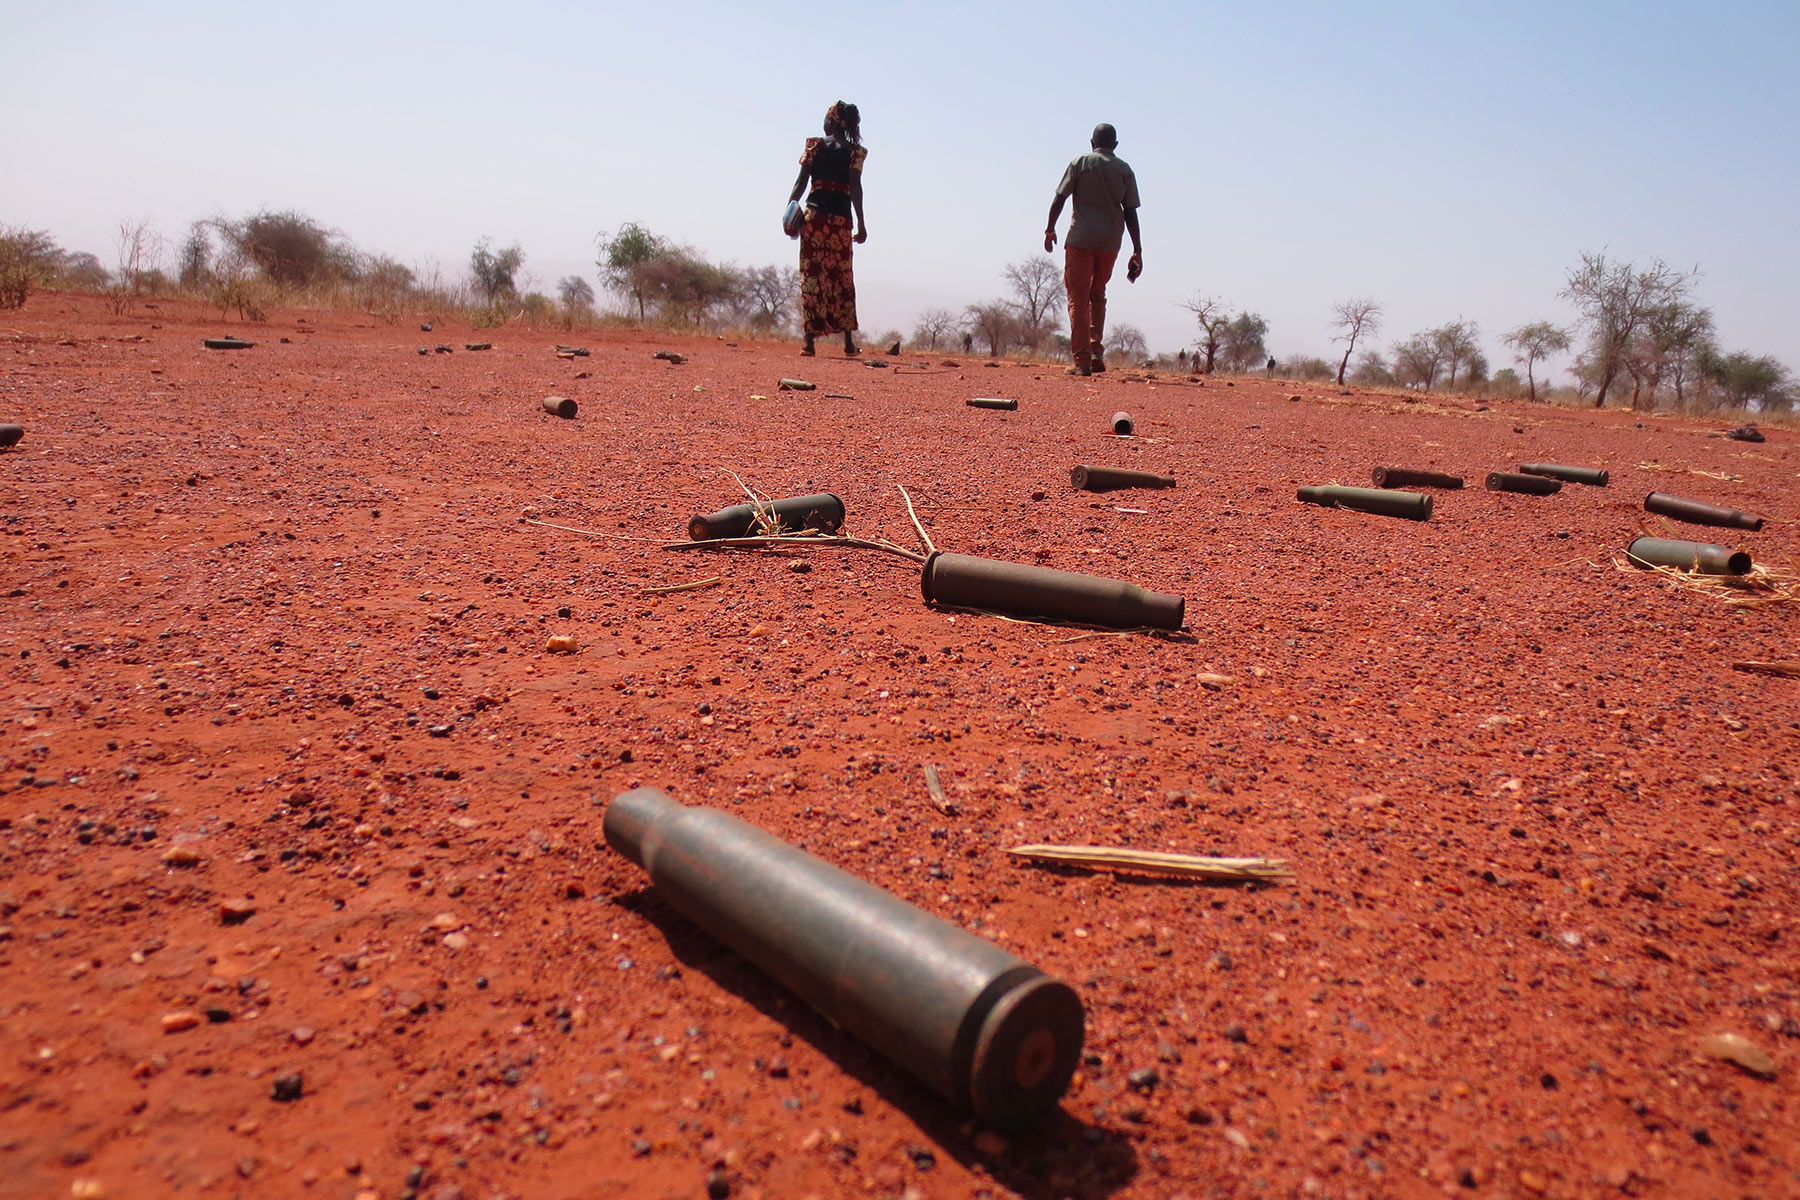 Two people walking across ground littered with bullet casings